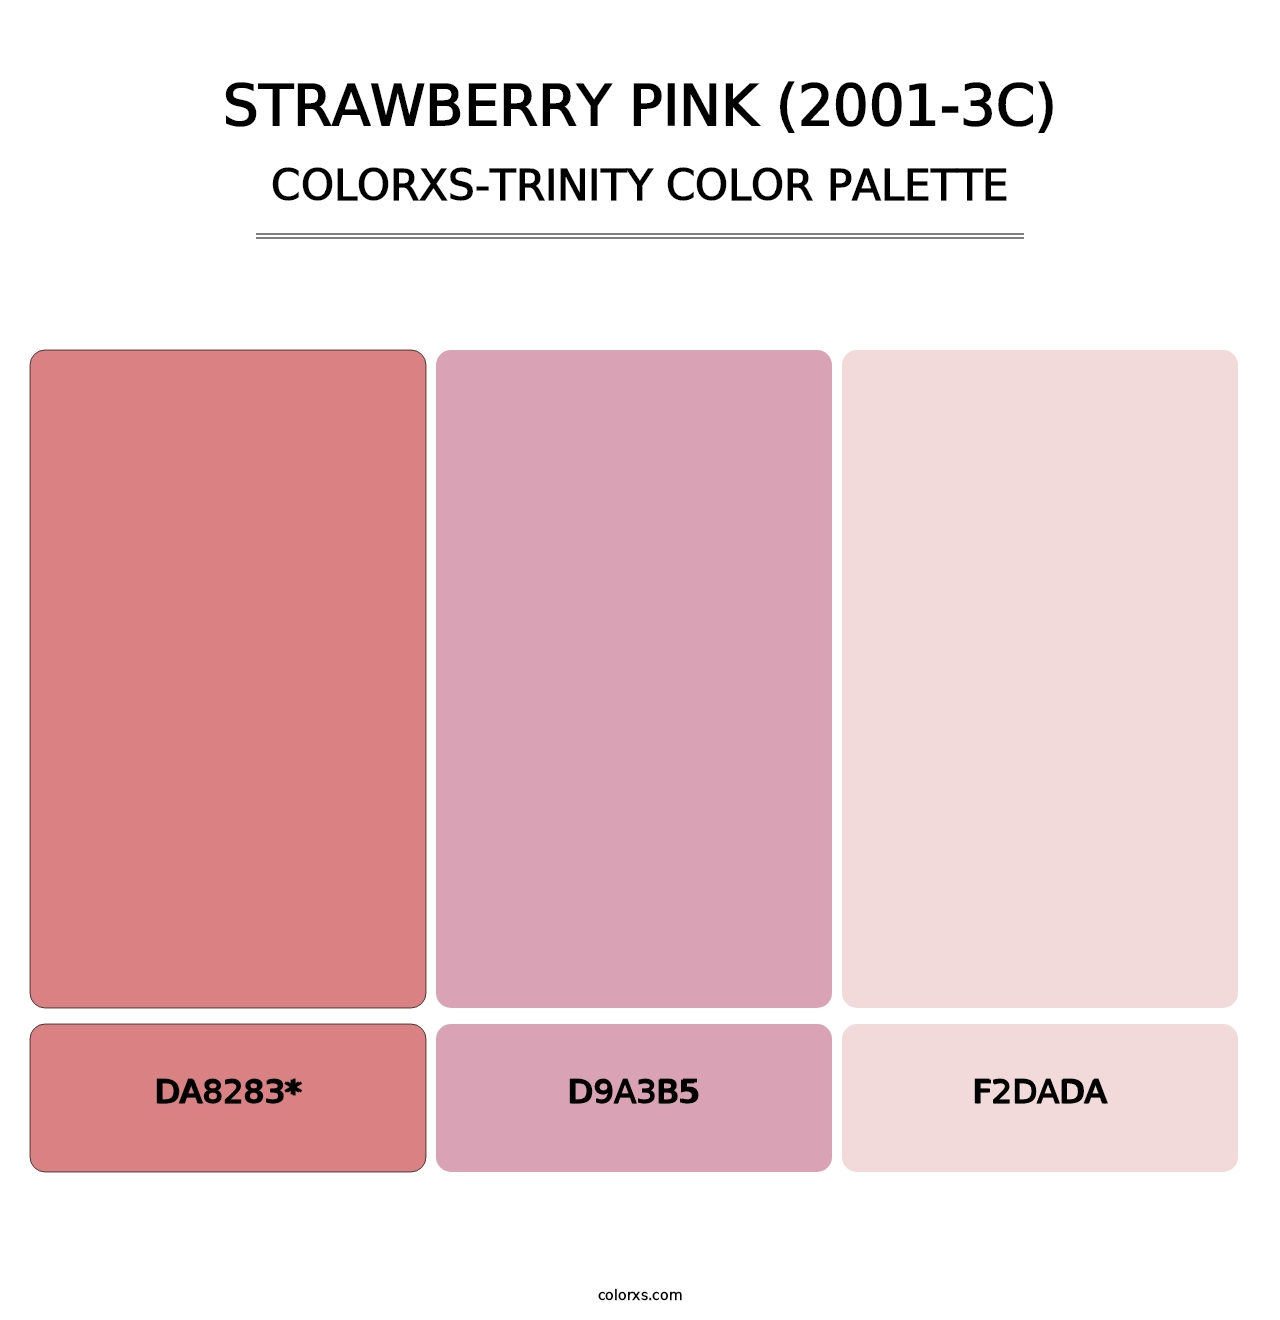 Strawberry Pink (2001-3C) - Colorxs Trinity Palette